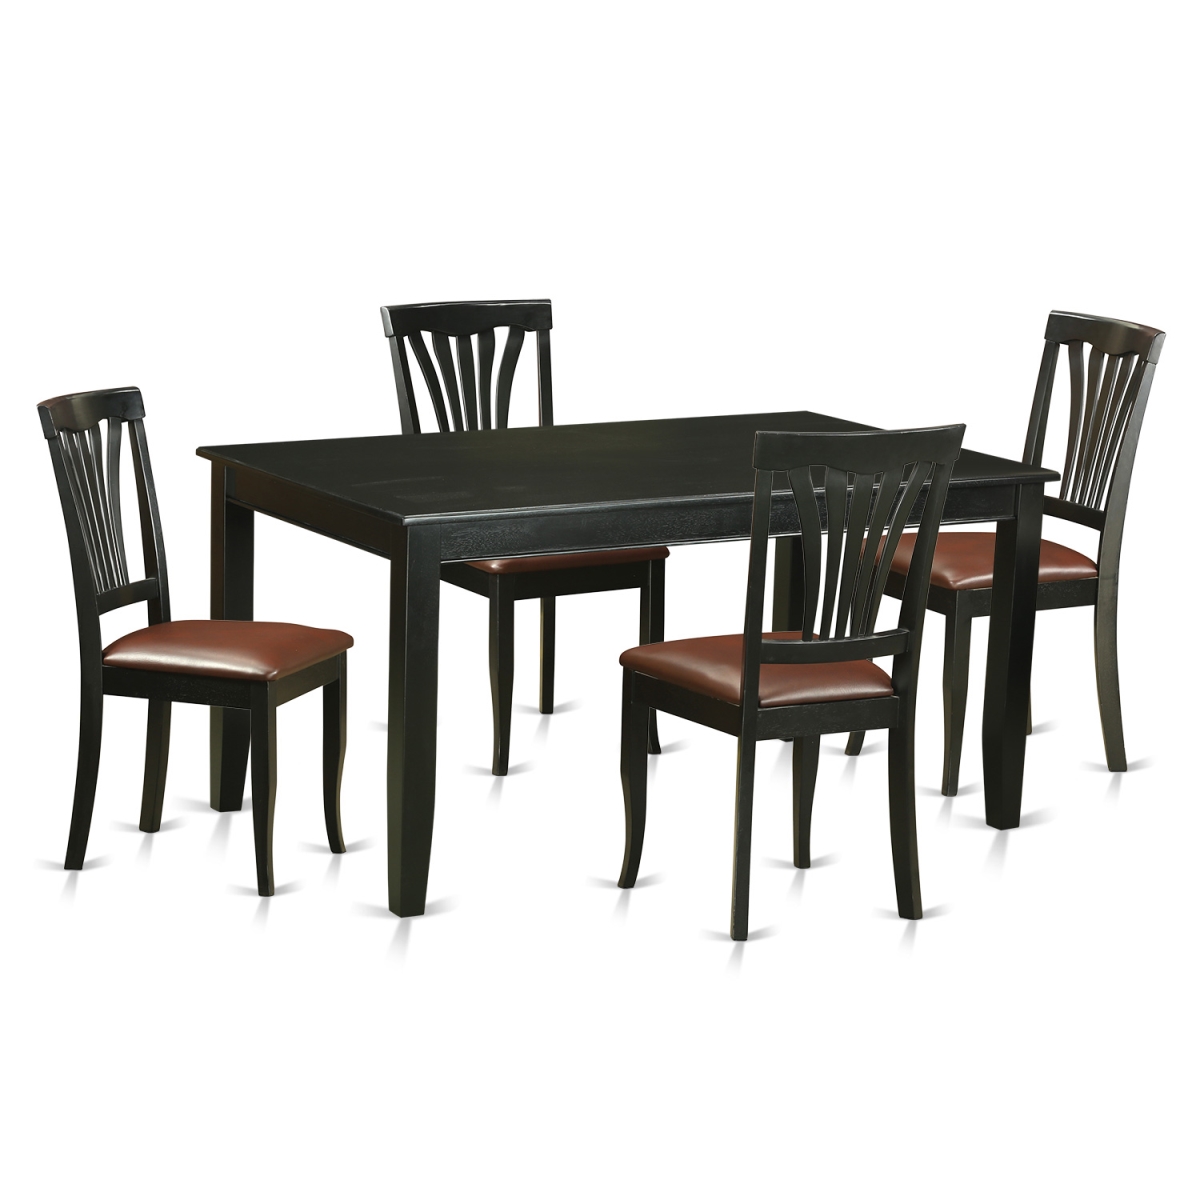 Picture of East West Furniture DUAV5-BLK-LC Faux Leather Dinette Set - Kitchen Table & 4 Chairs, Black - 5 Piece